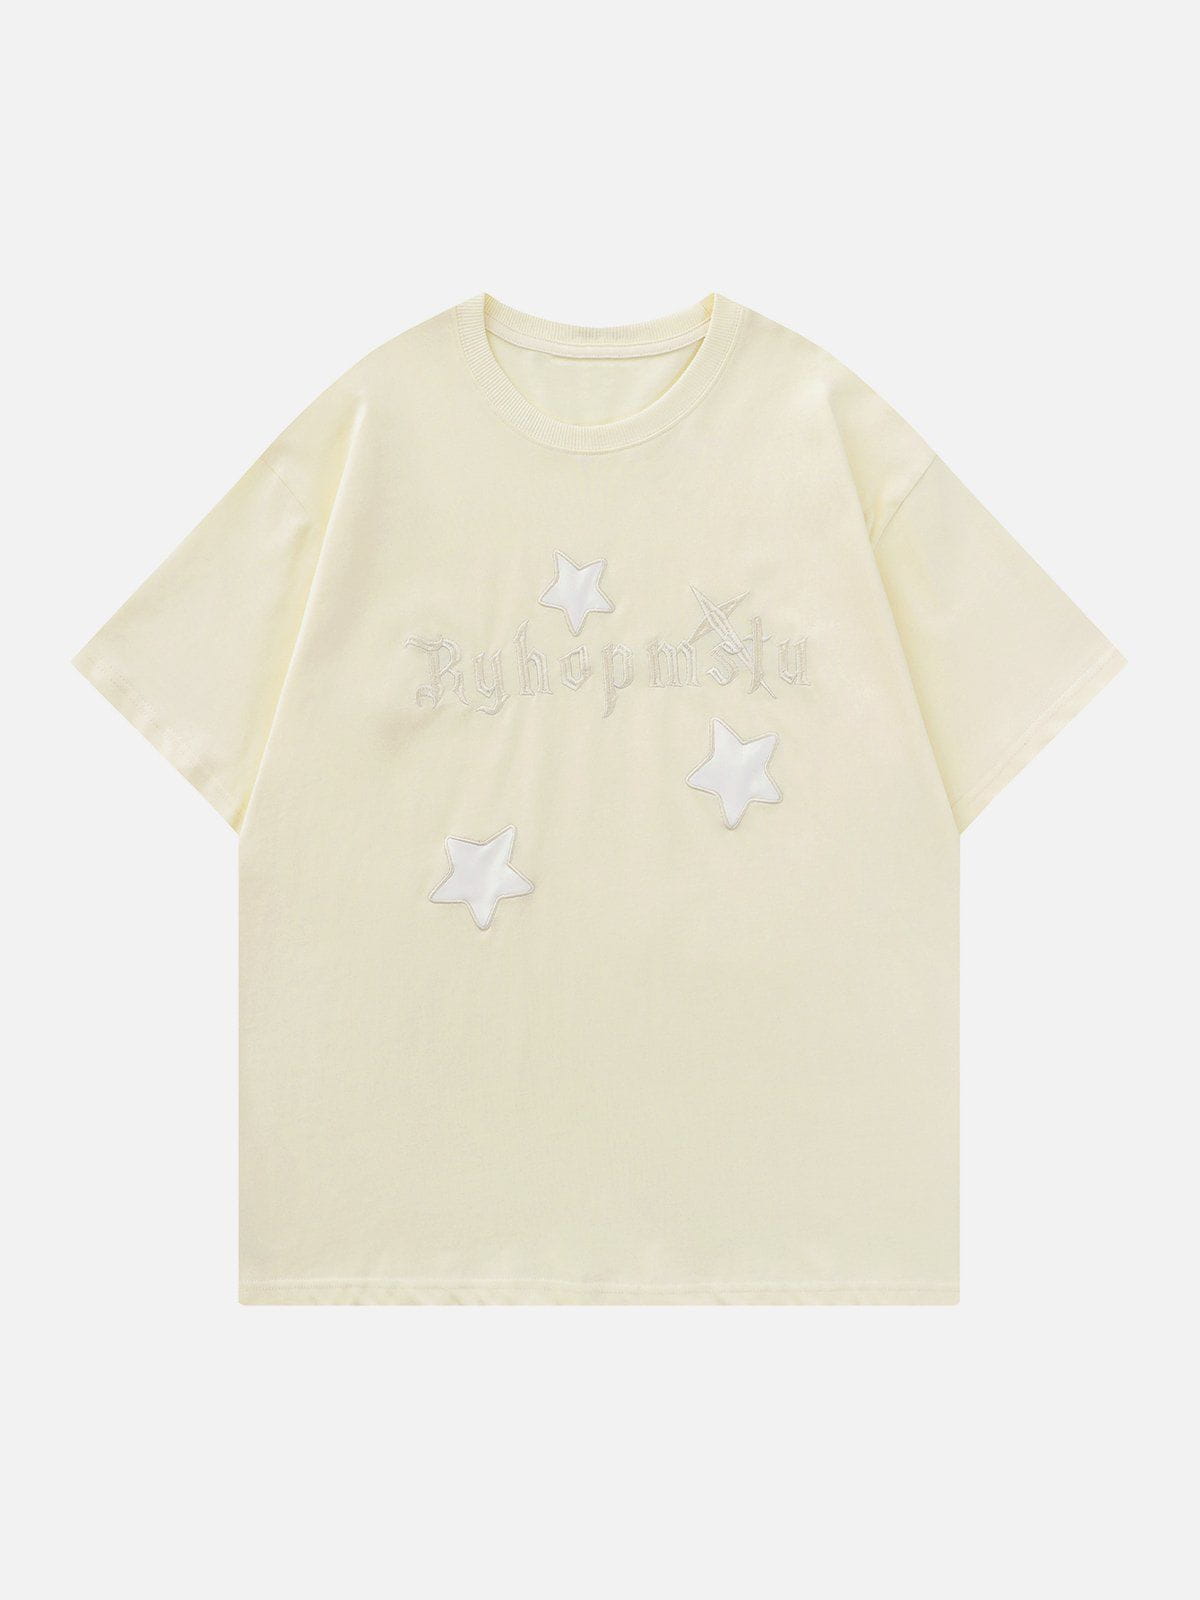 Sneakerland™ - Star Letter Embroidery Tee